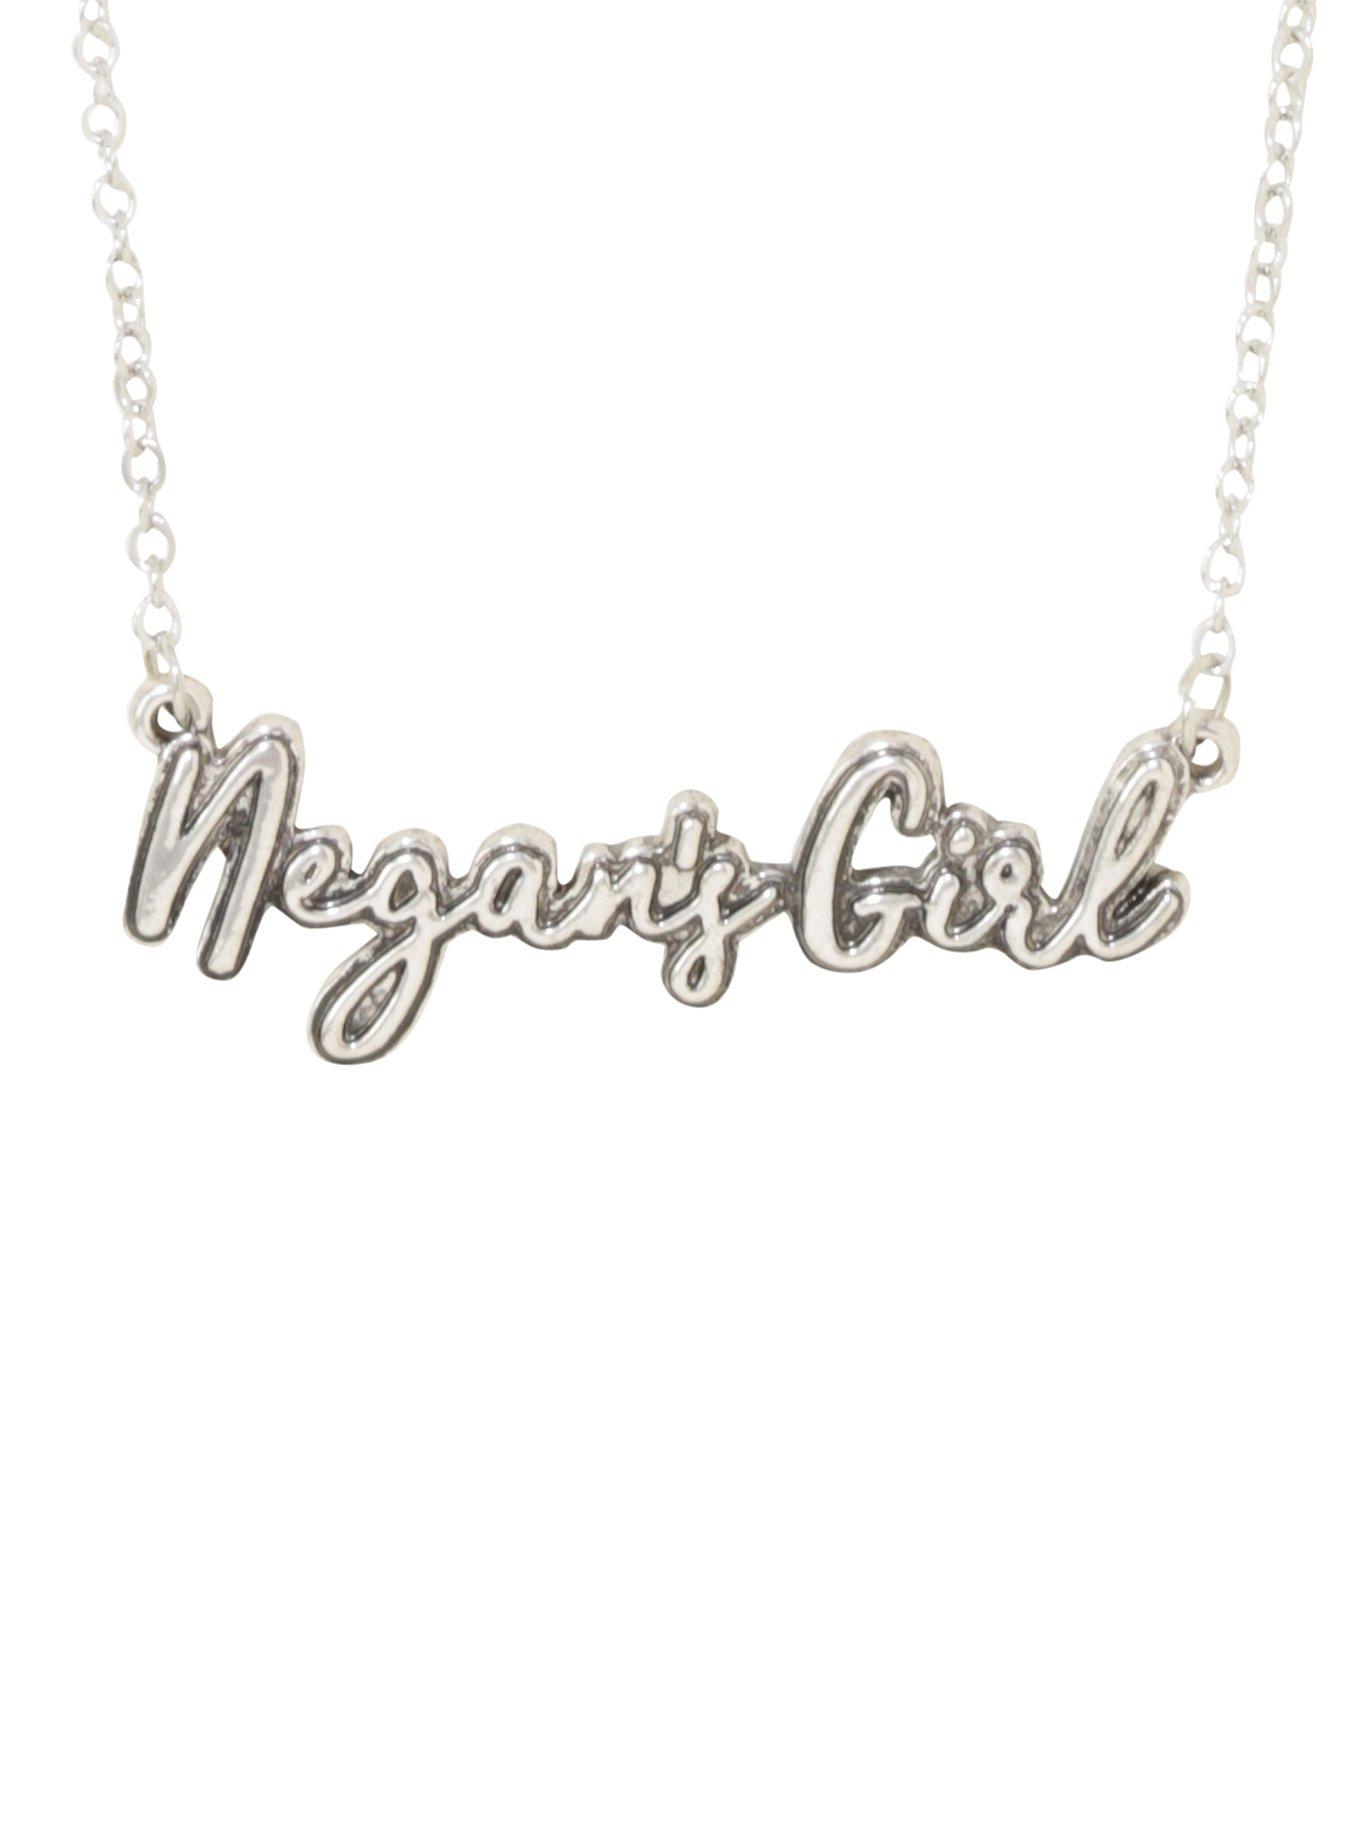 The Walking Dead Negan's Girl Name Plate Necklace, , hi-res